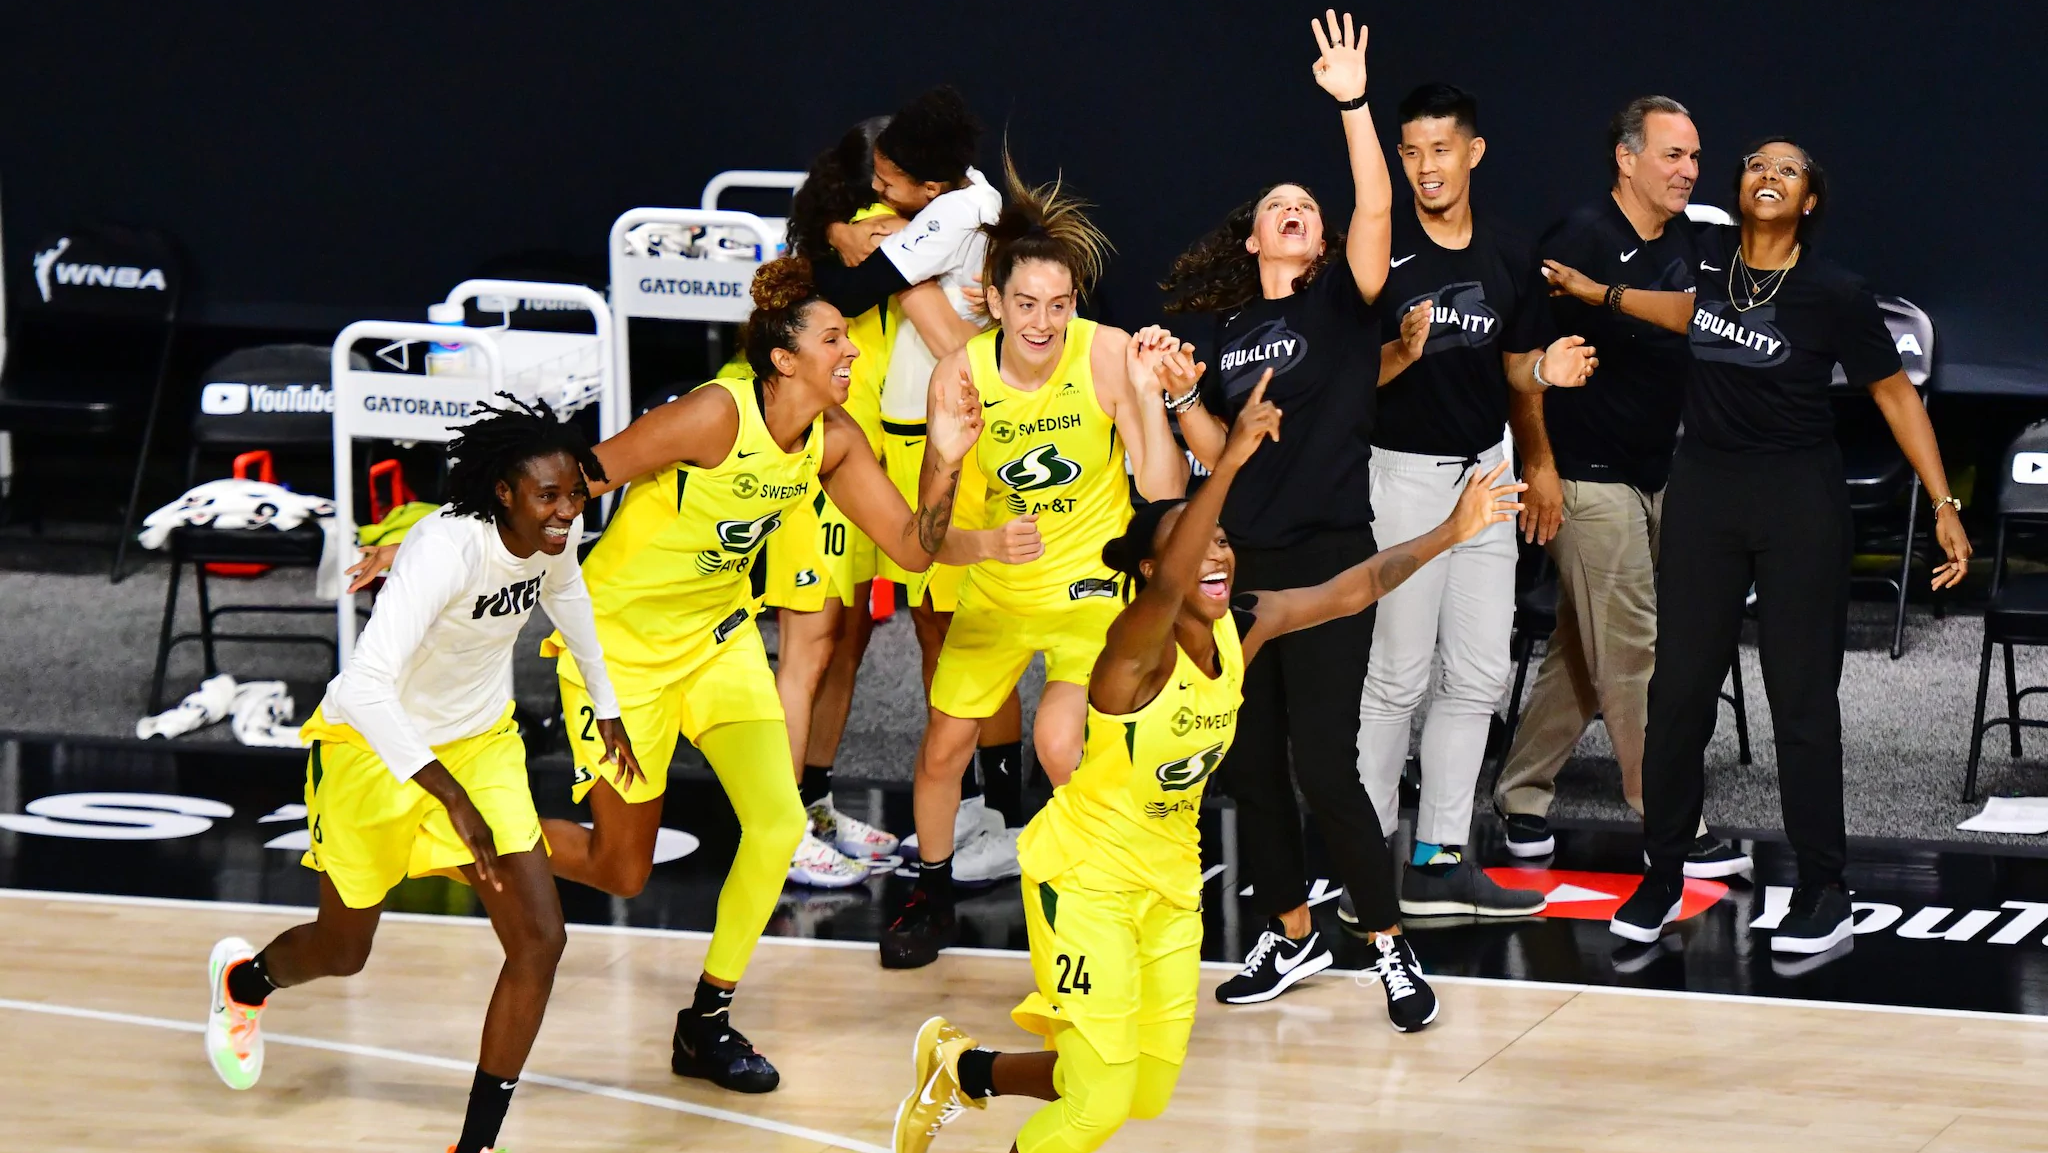 Oct. 6, 2020 - Seattle Storm. Photo: NBAE/Getty Images.